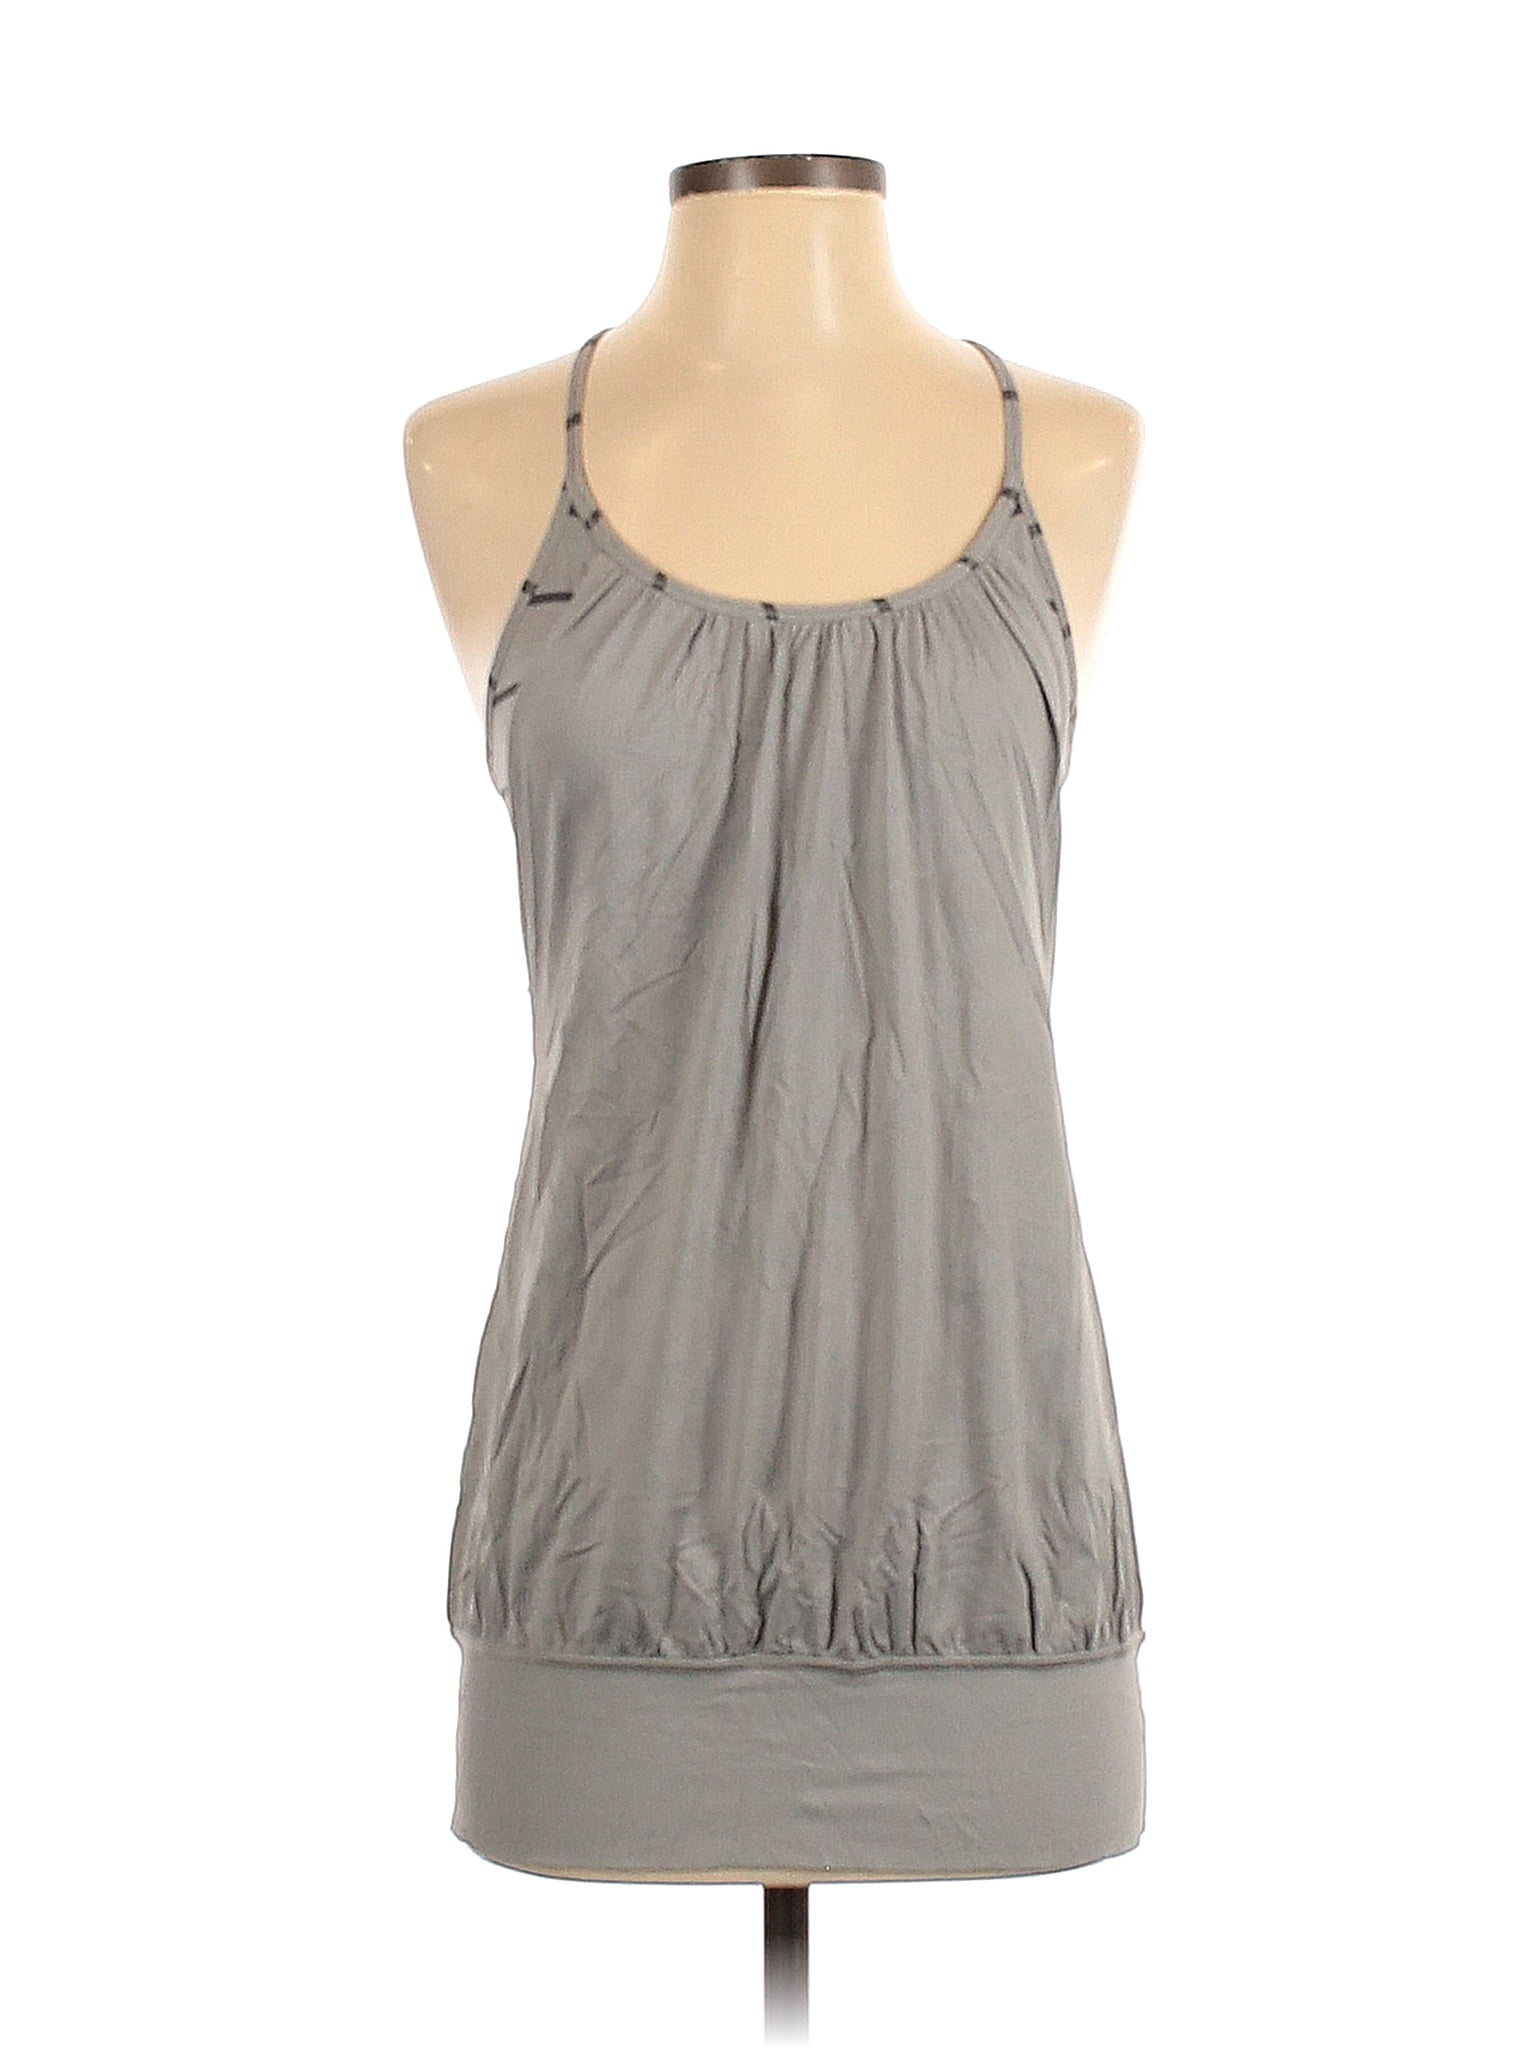 Pre-Owned Lululemon Athletica Womens Size 6 Tank Top Nigeria